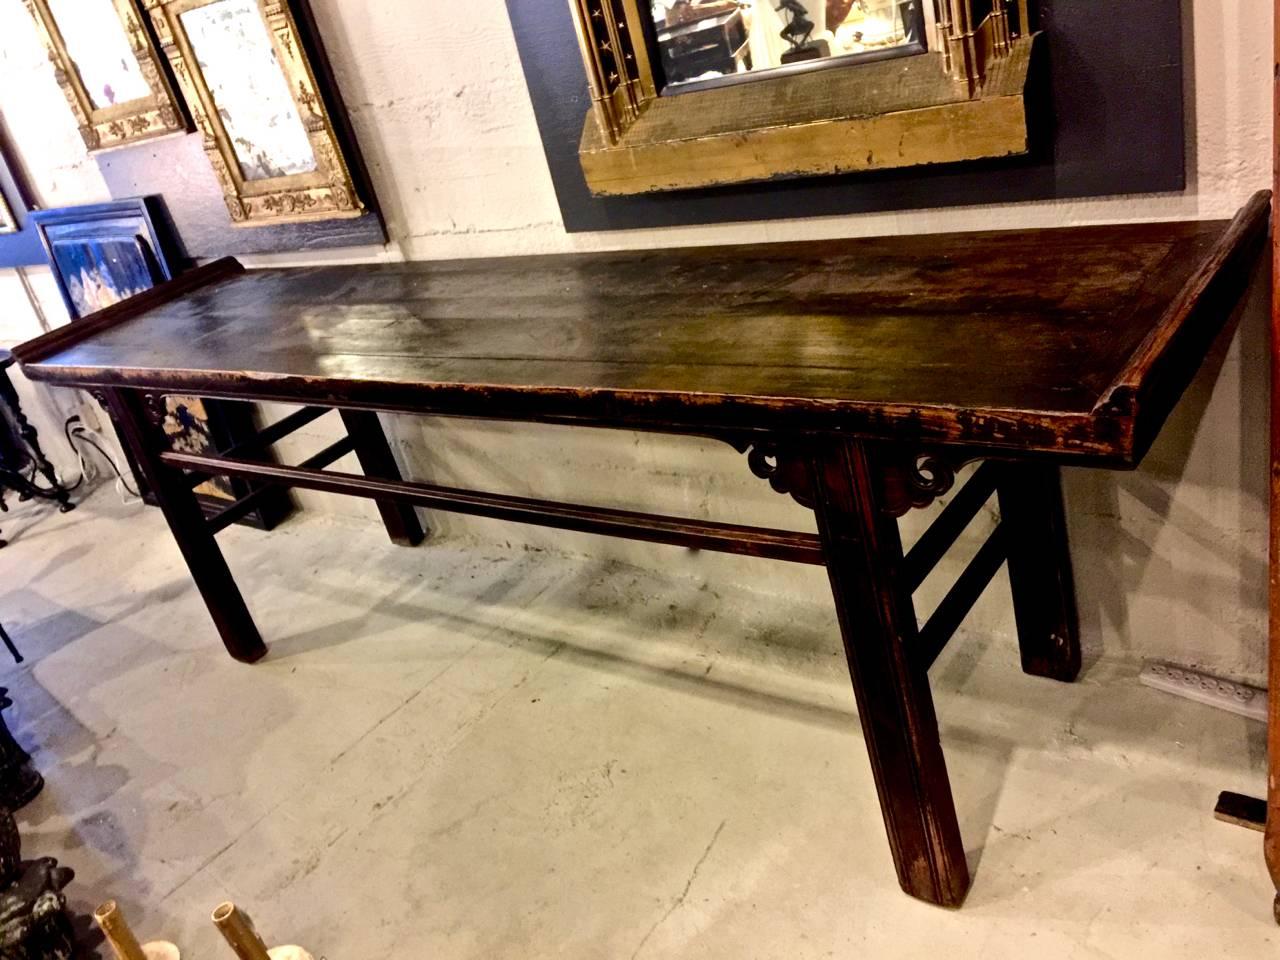 This is a long Chinese mid-19th century altar table in brown lacquered solid elmwood. The table has acquired a deep natural patina over its nearly two hundred years of use. This table would make a wonderful kitchen island work space or counter.